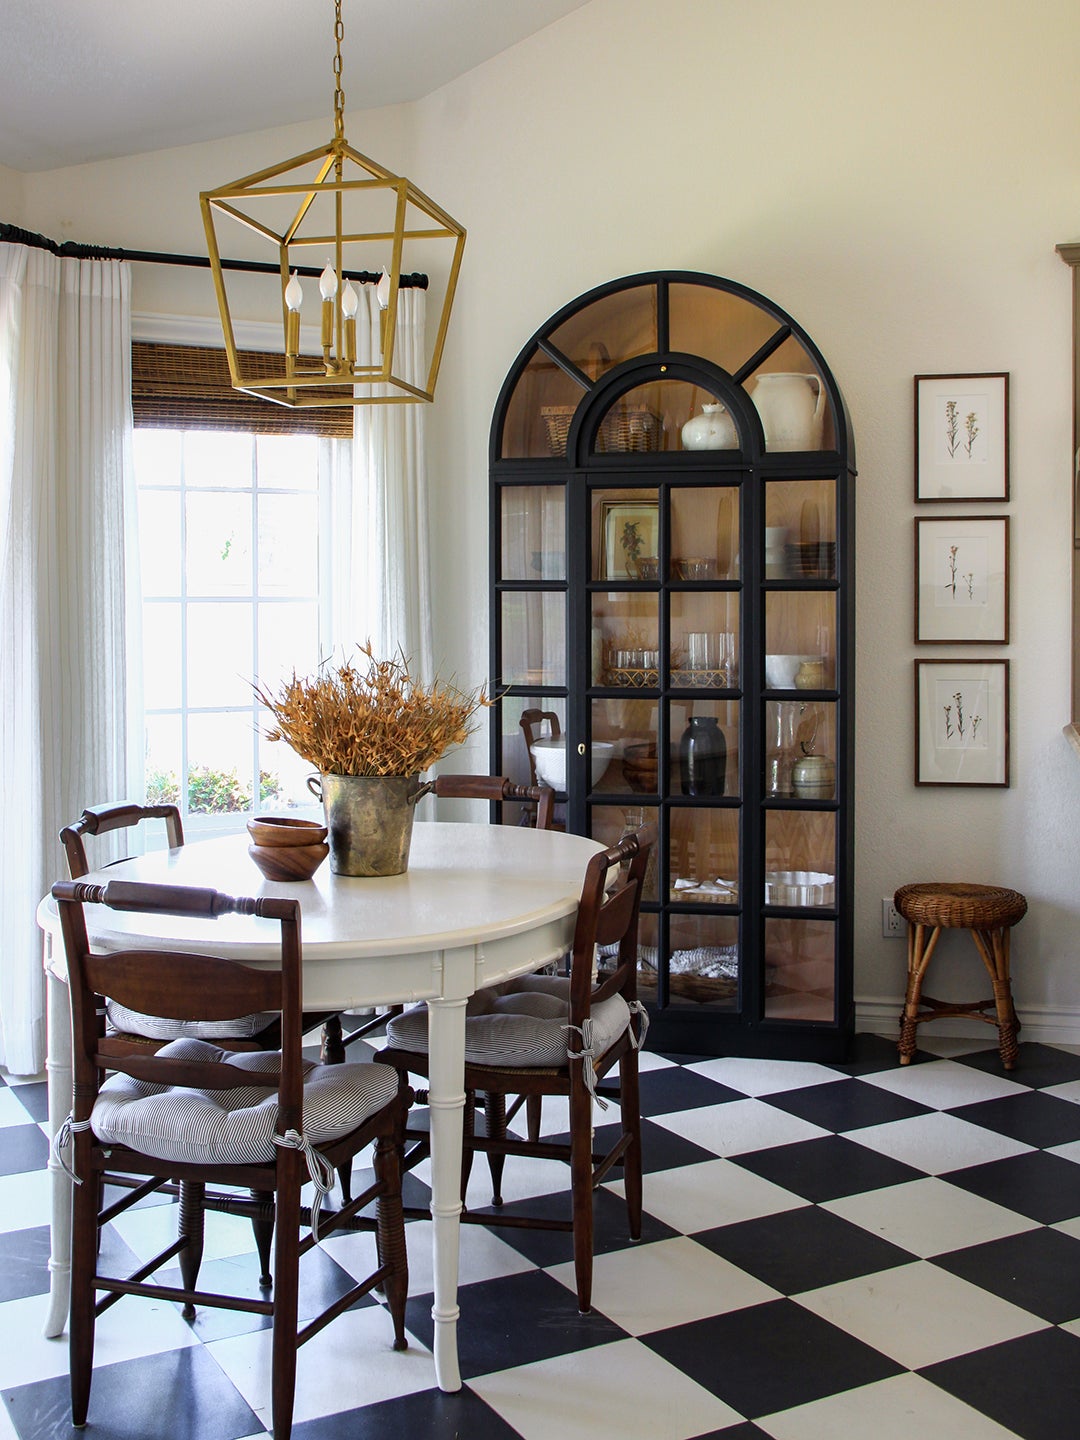 breakfast table with checkered floors